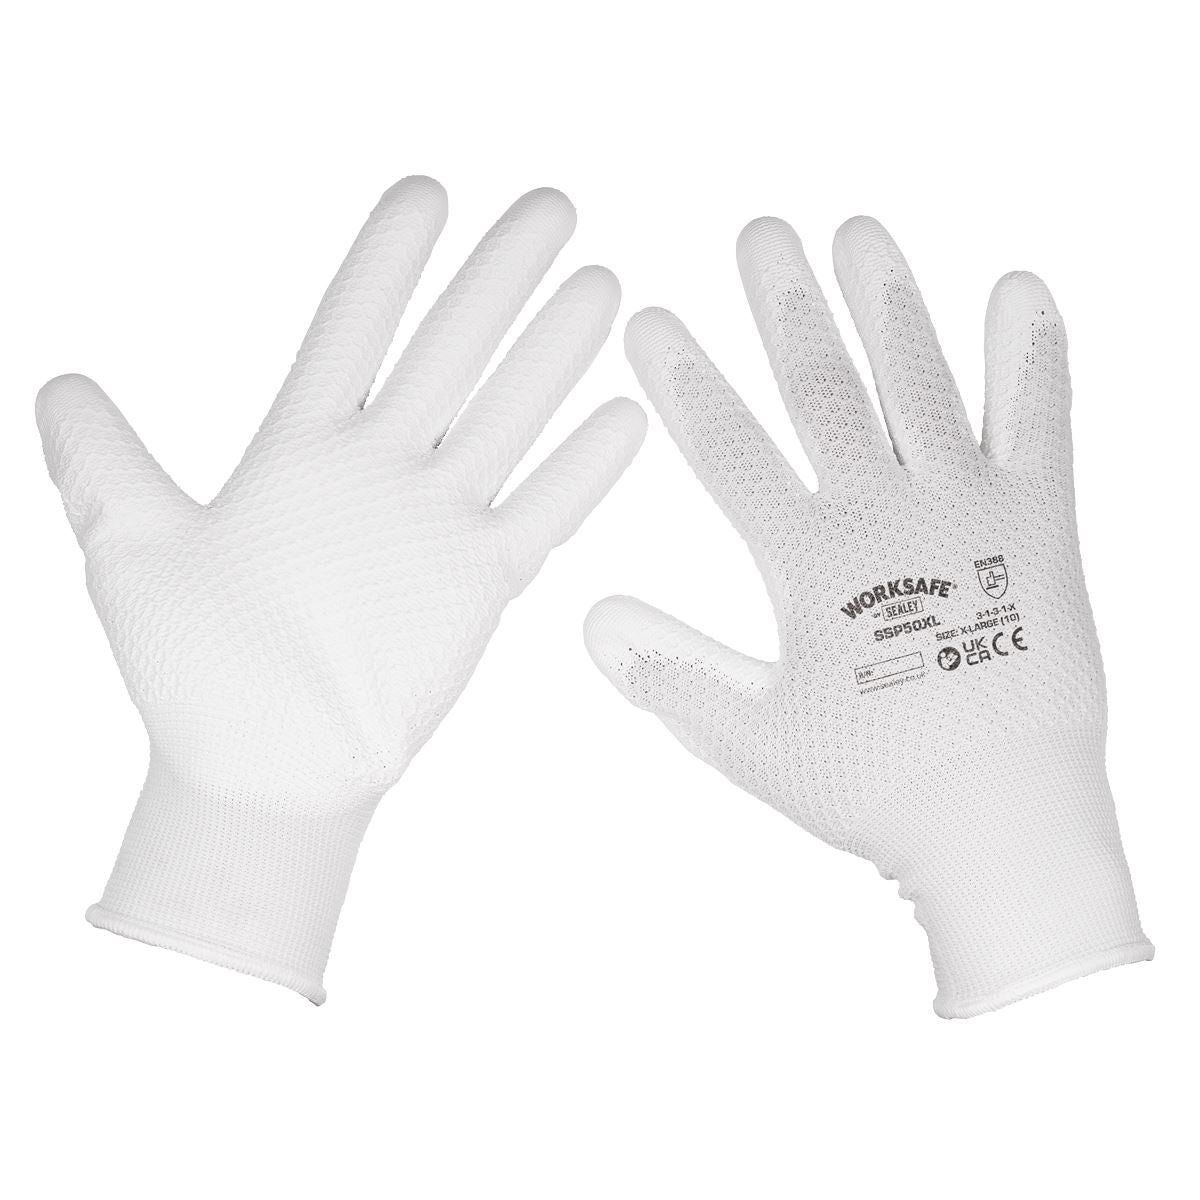 Worksafe by Sealey White Precision Grip Gloves - (X-Large) - Box of 120 Pairs